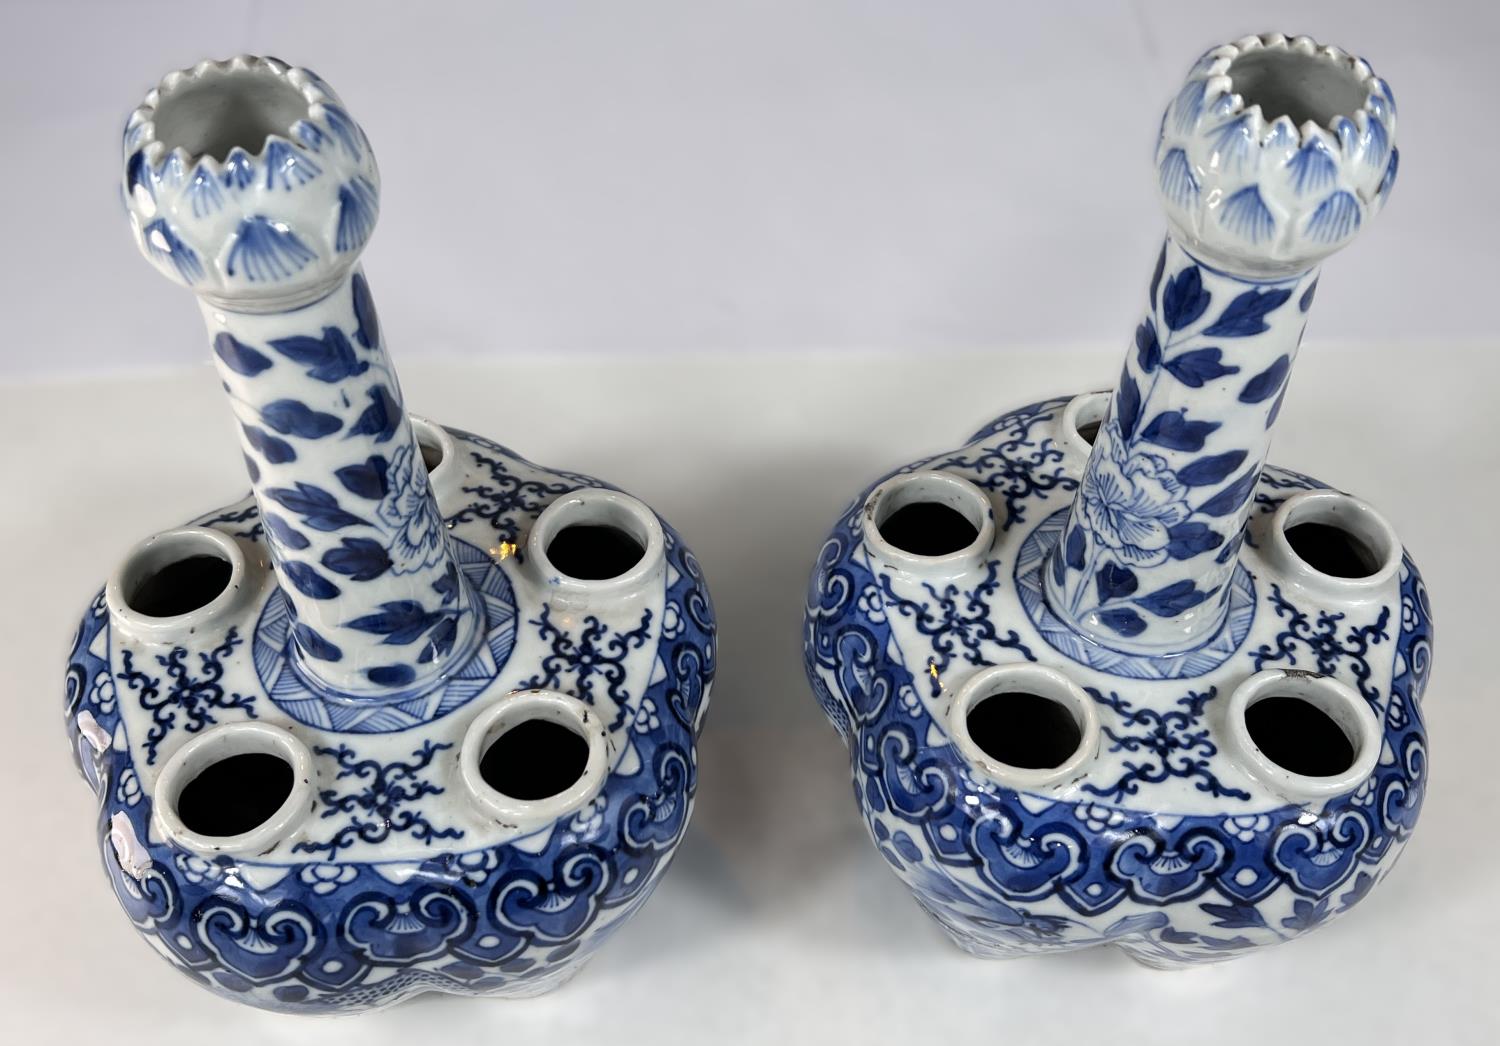 A pair of 19th century Chinese tulip or crocus vases blue and white decoration, with tapering neck - Image 2 of 8